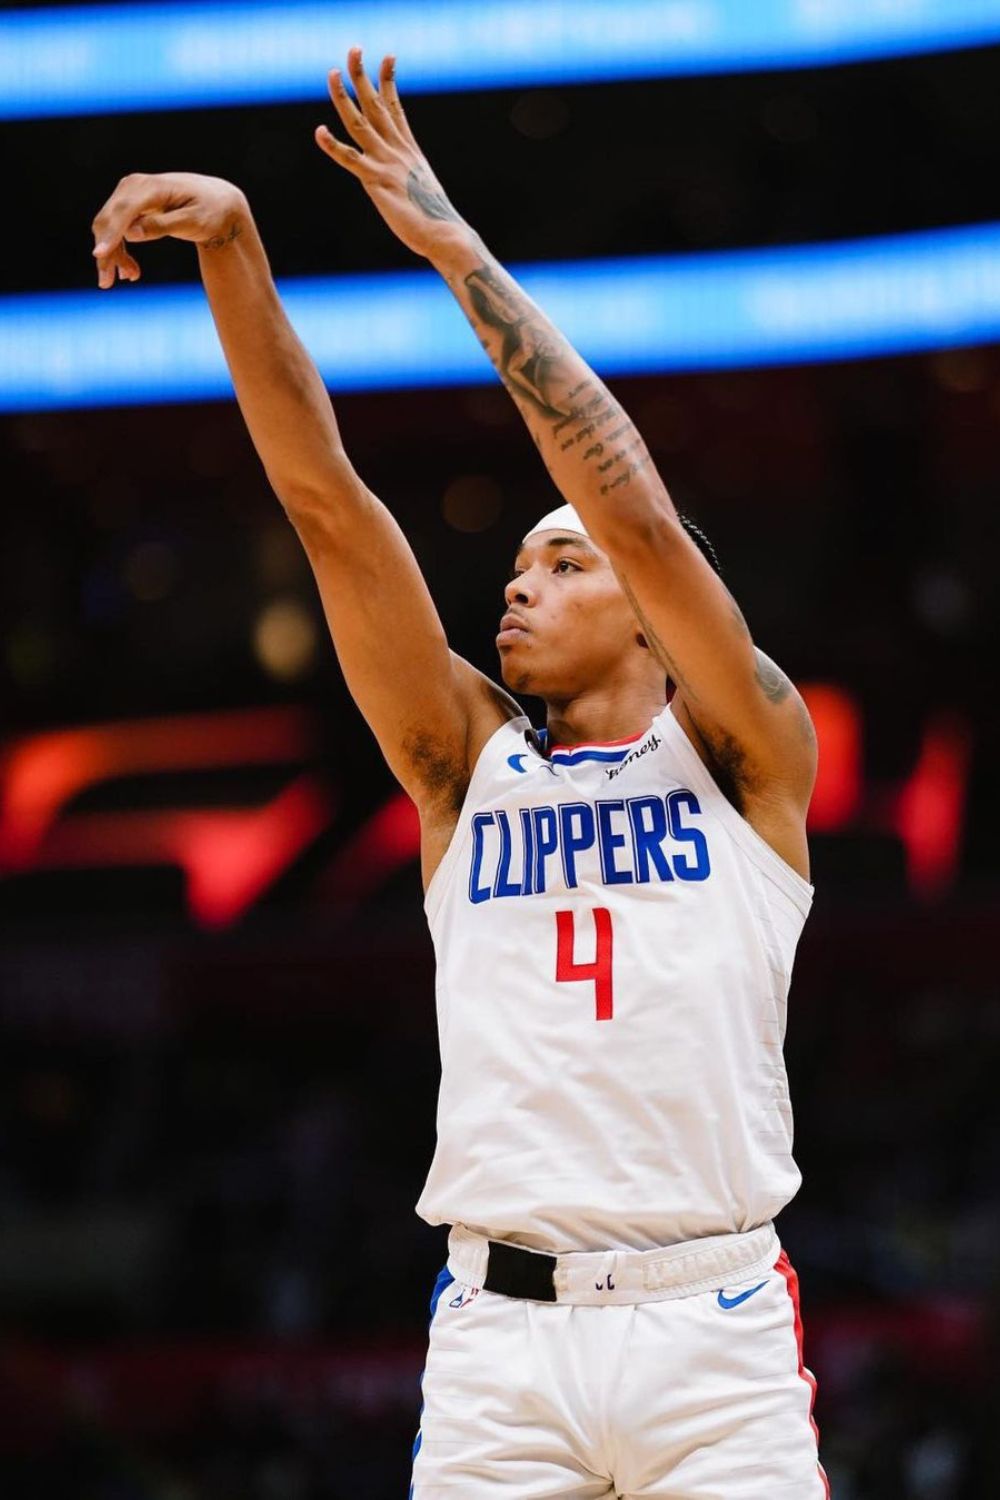 Brandon Boston Jr. For The Clippers